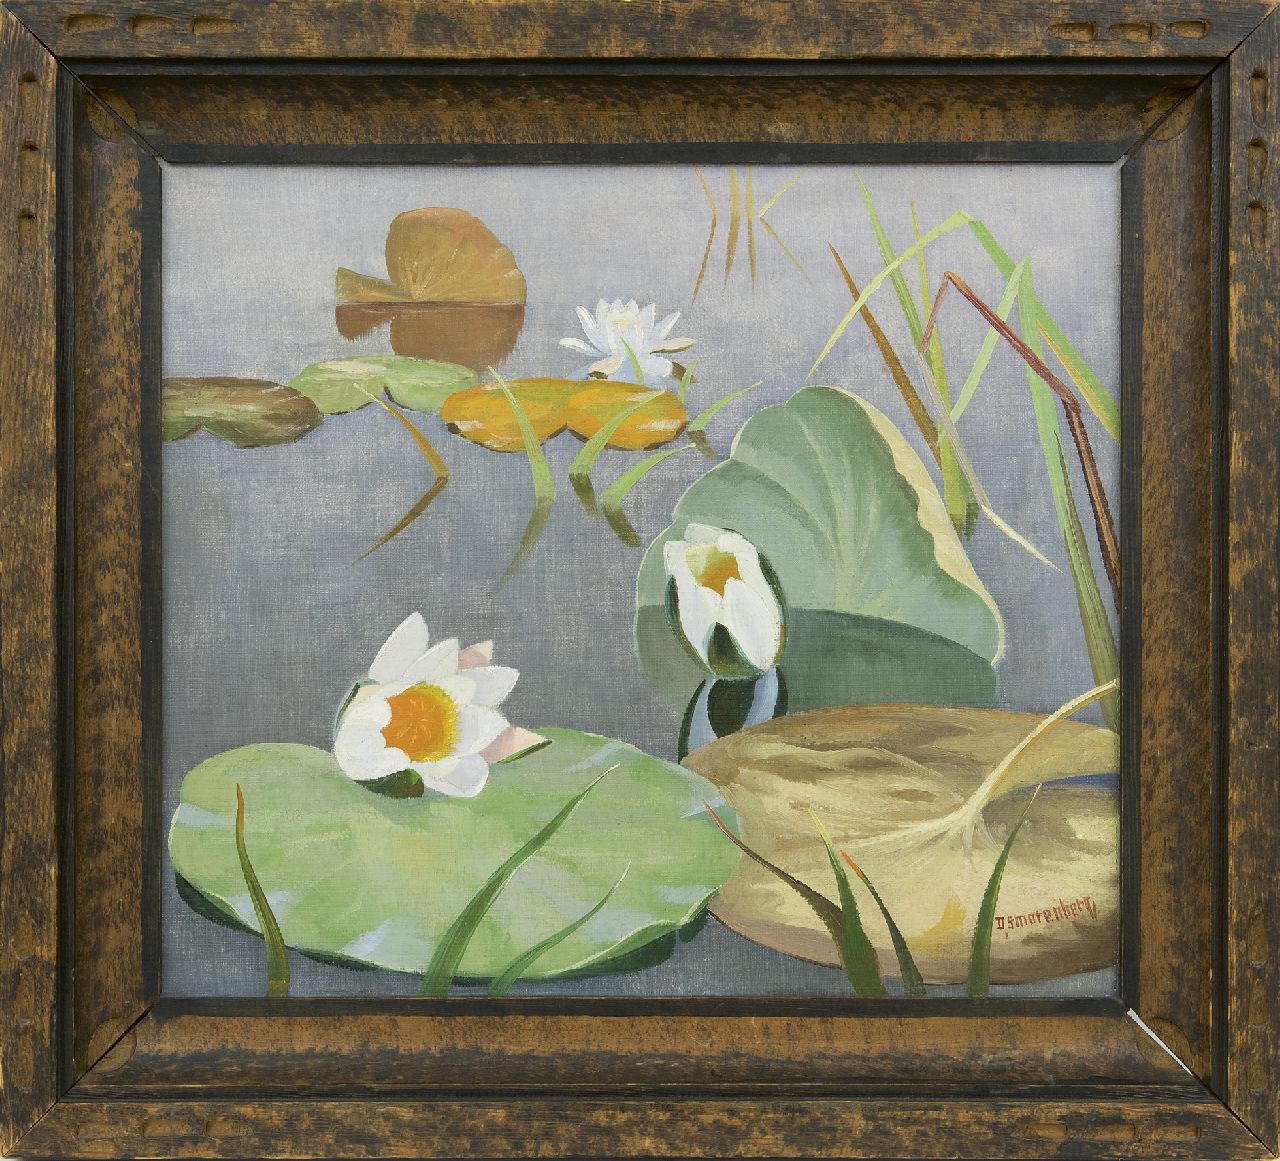 Smorenberg D.  | Dirk Smorenberg, Water lilies, oil on canvas 34.4 x 39.3 cm, signed l.r.